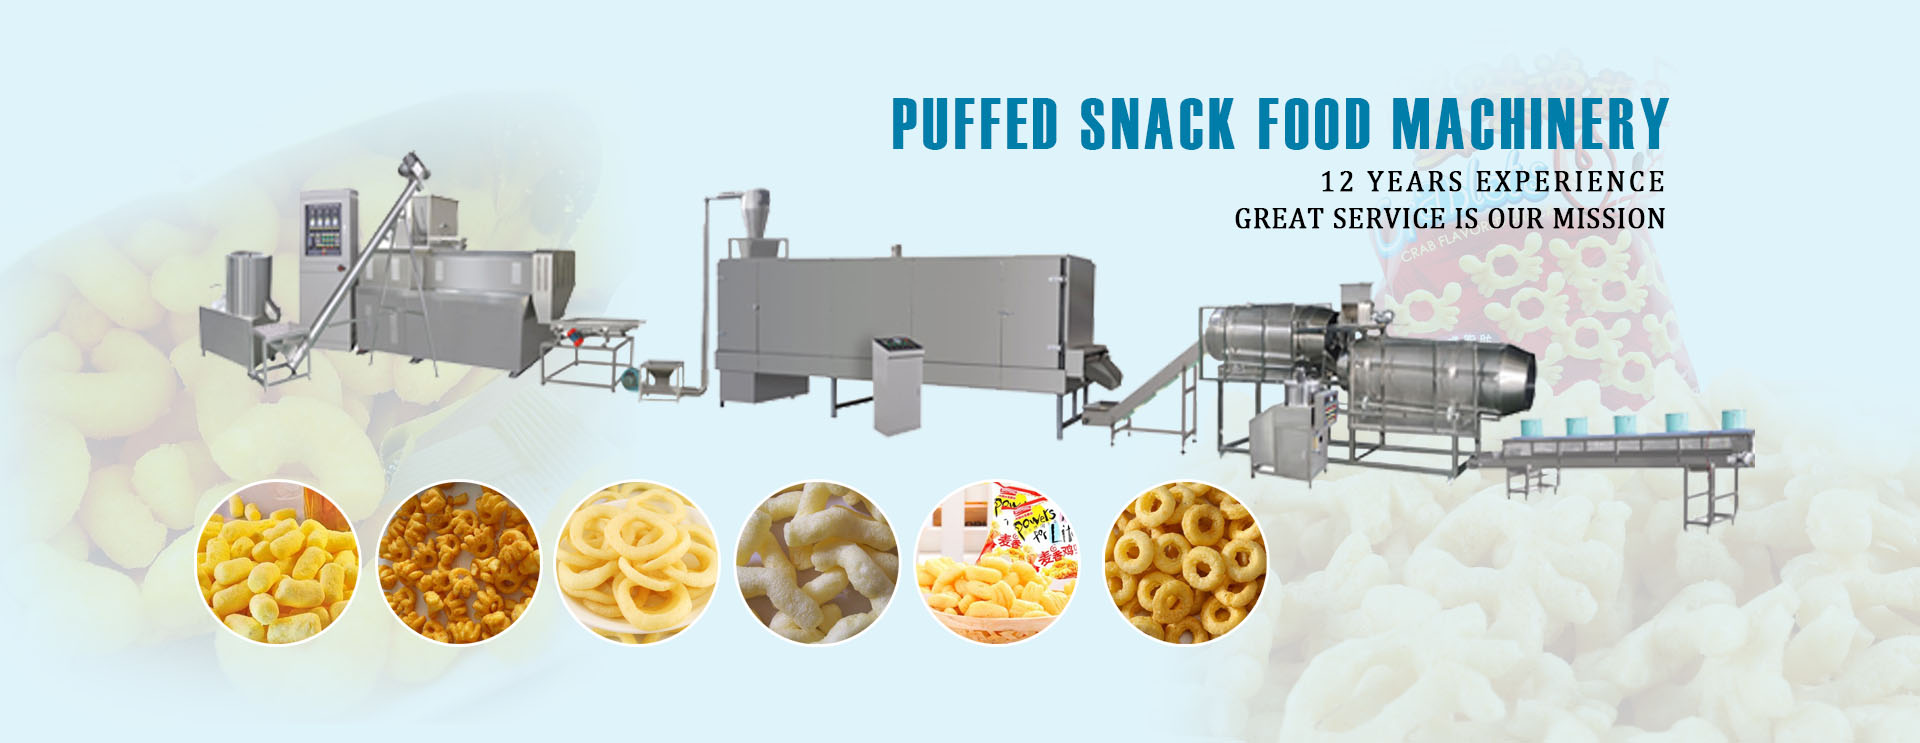 snack food machinery extruder